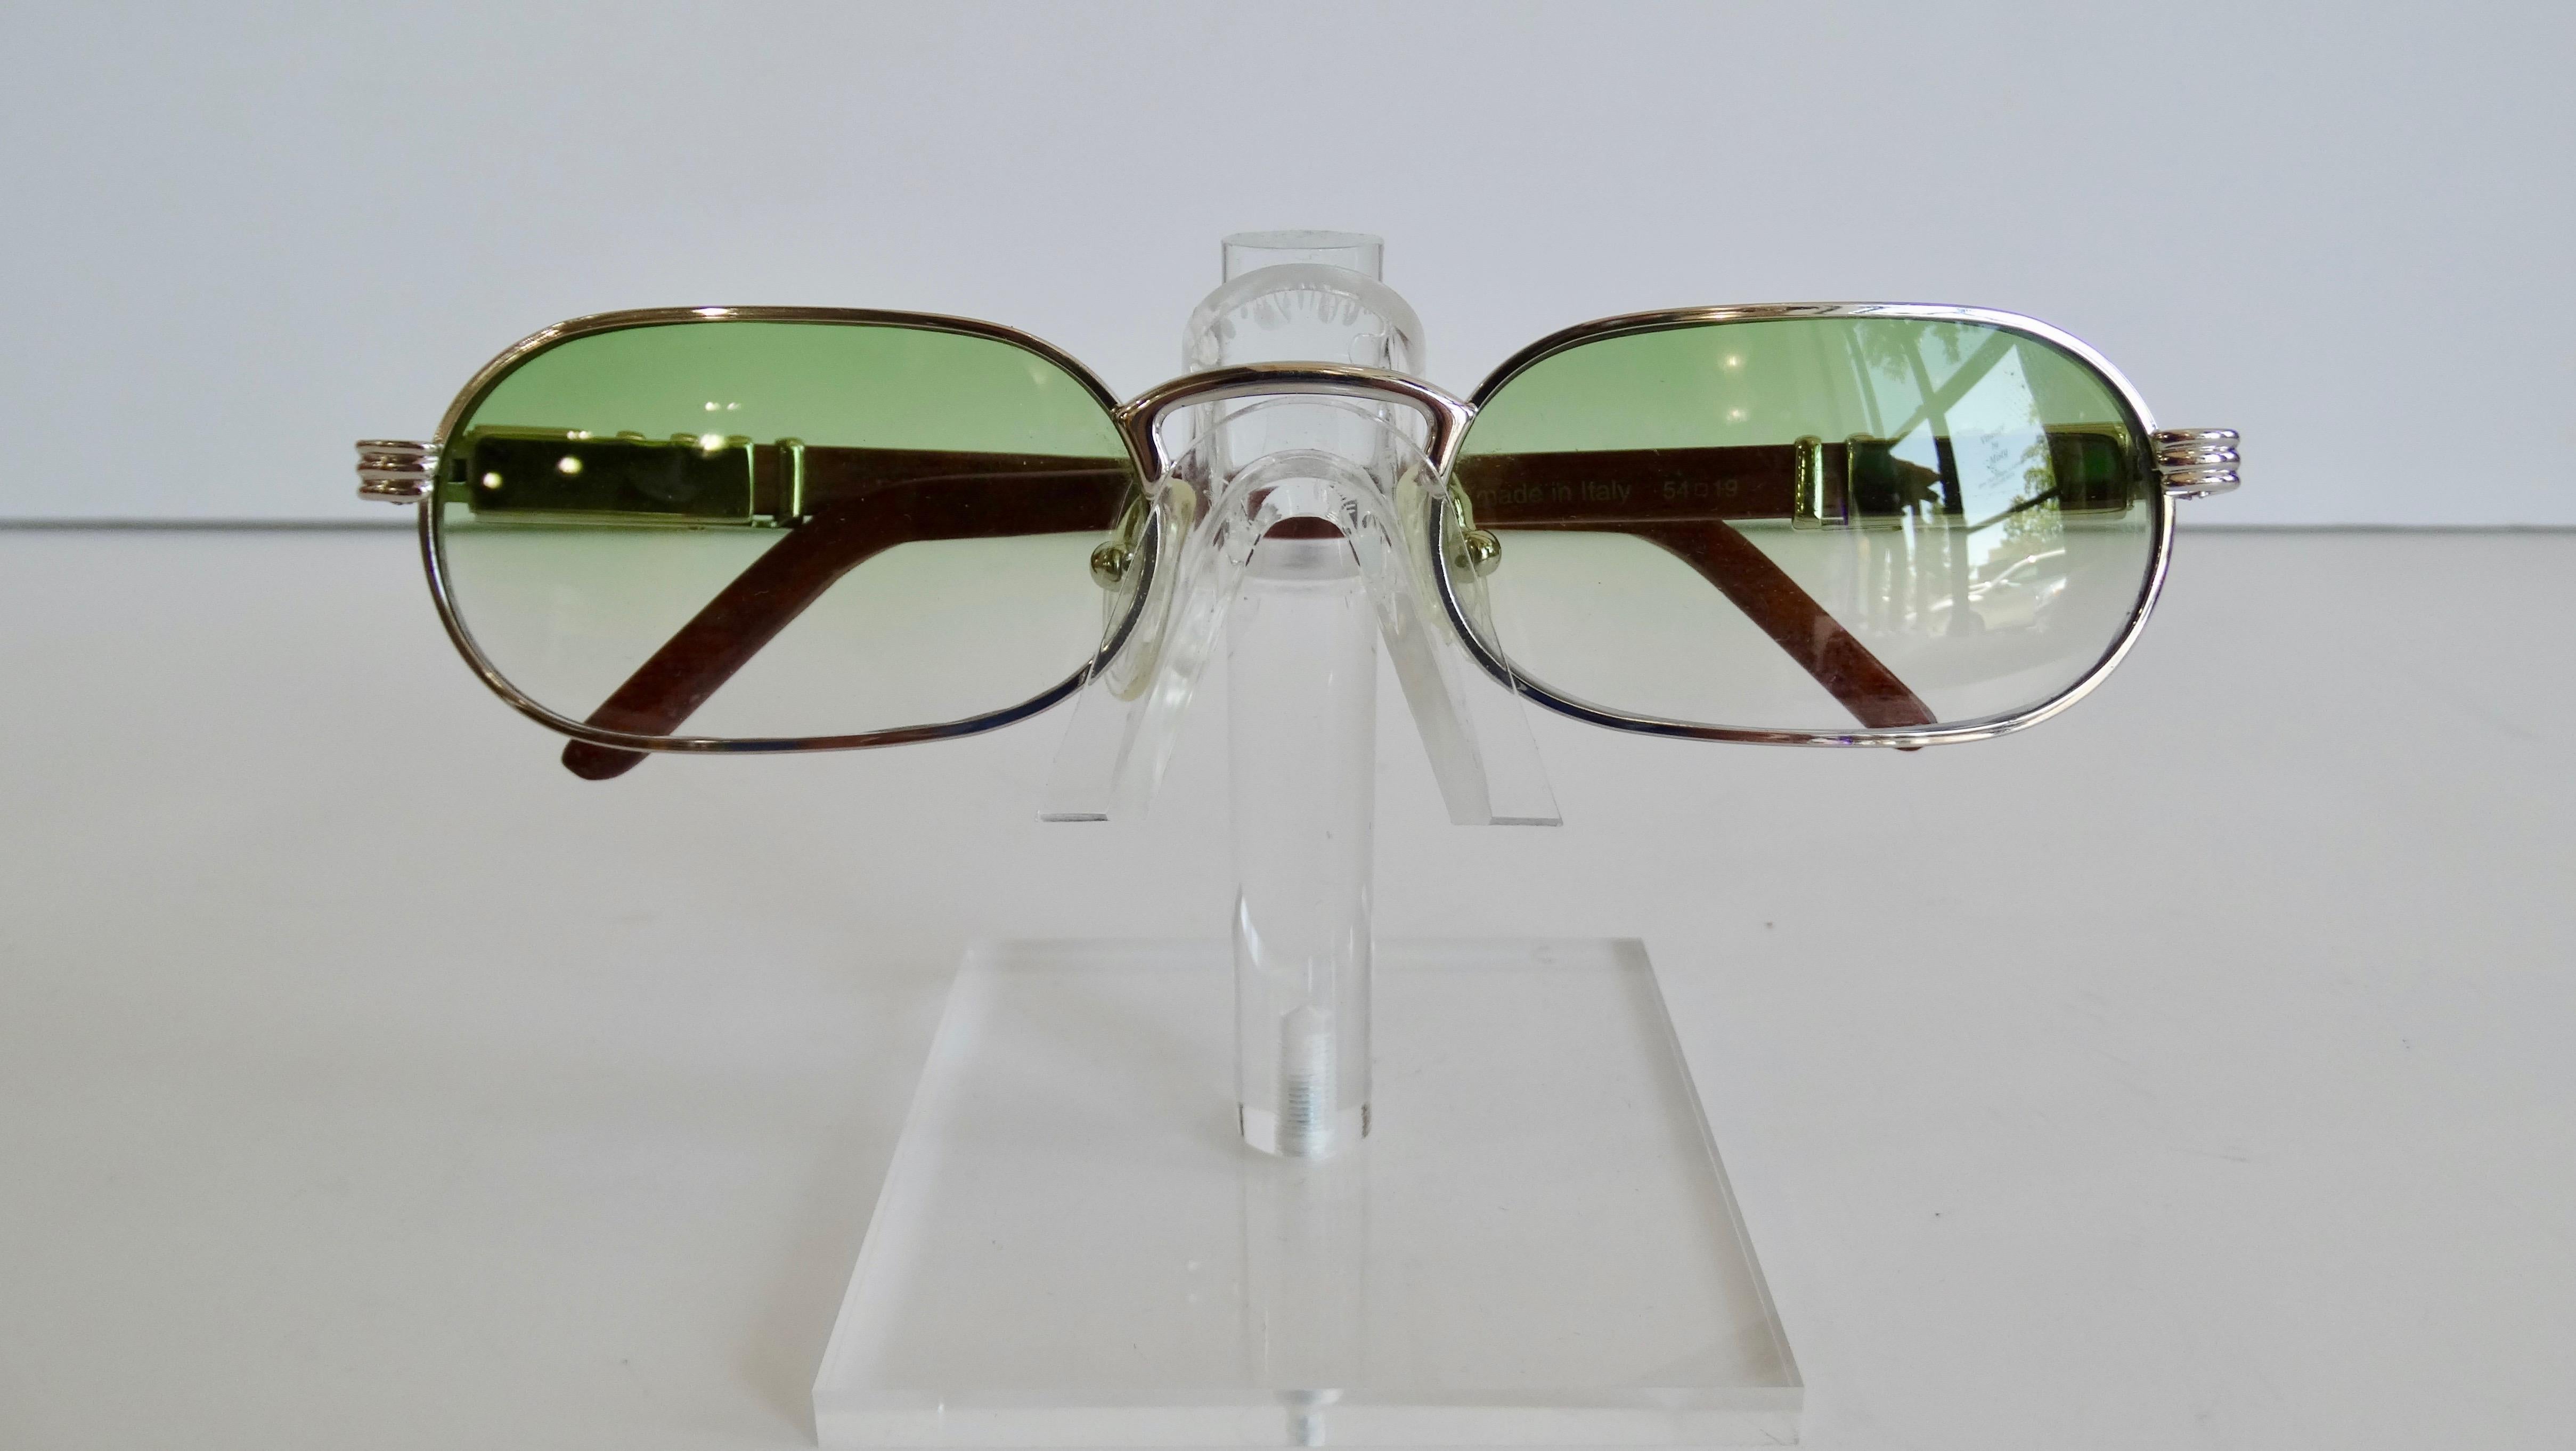 The Perfect Shades For The Summer Sun! Circa 1990s, these Porta Romana skinny oval sunglasses feature a green ombre lens and silver hardware. The silver hardware resting on the dark cherry wood stained arms features subtle horizontal and vertical